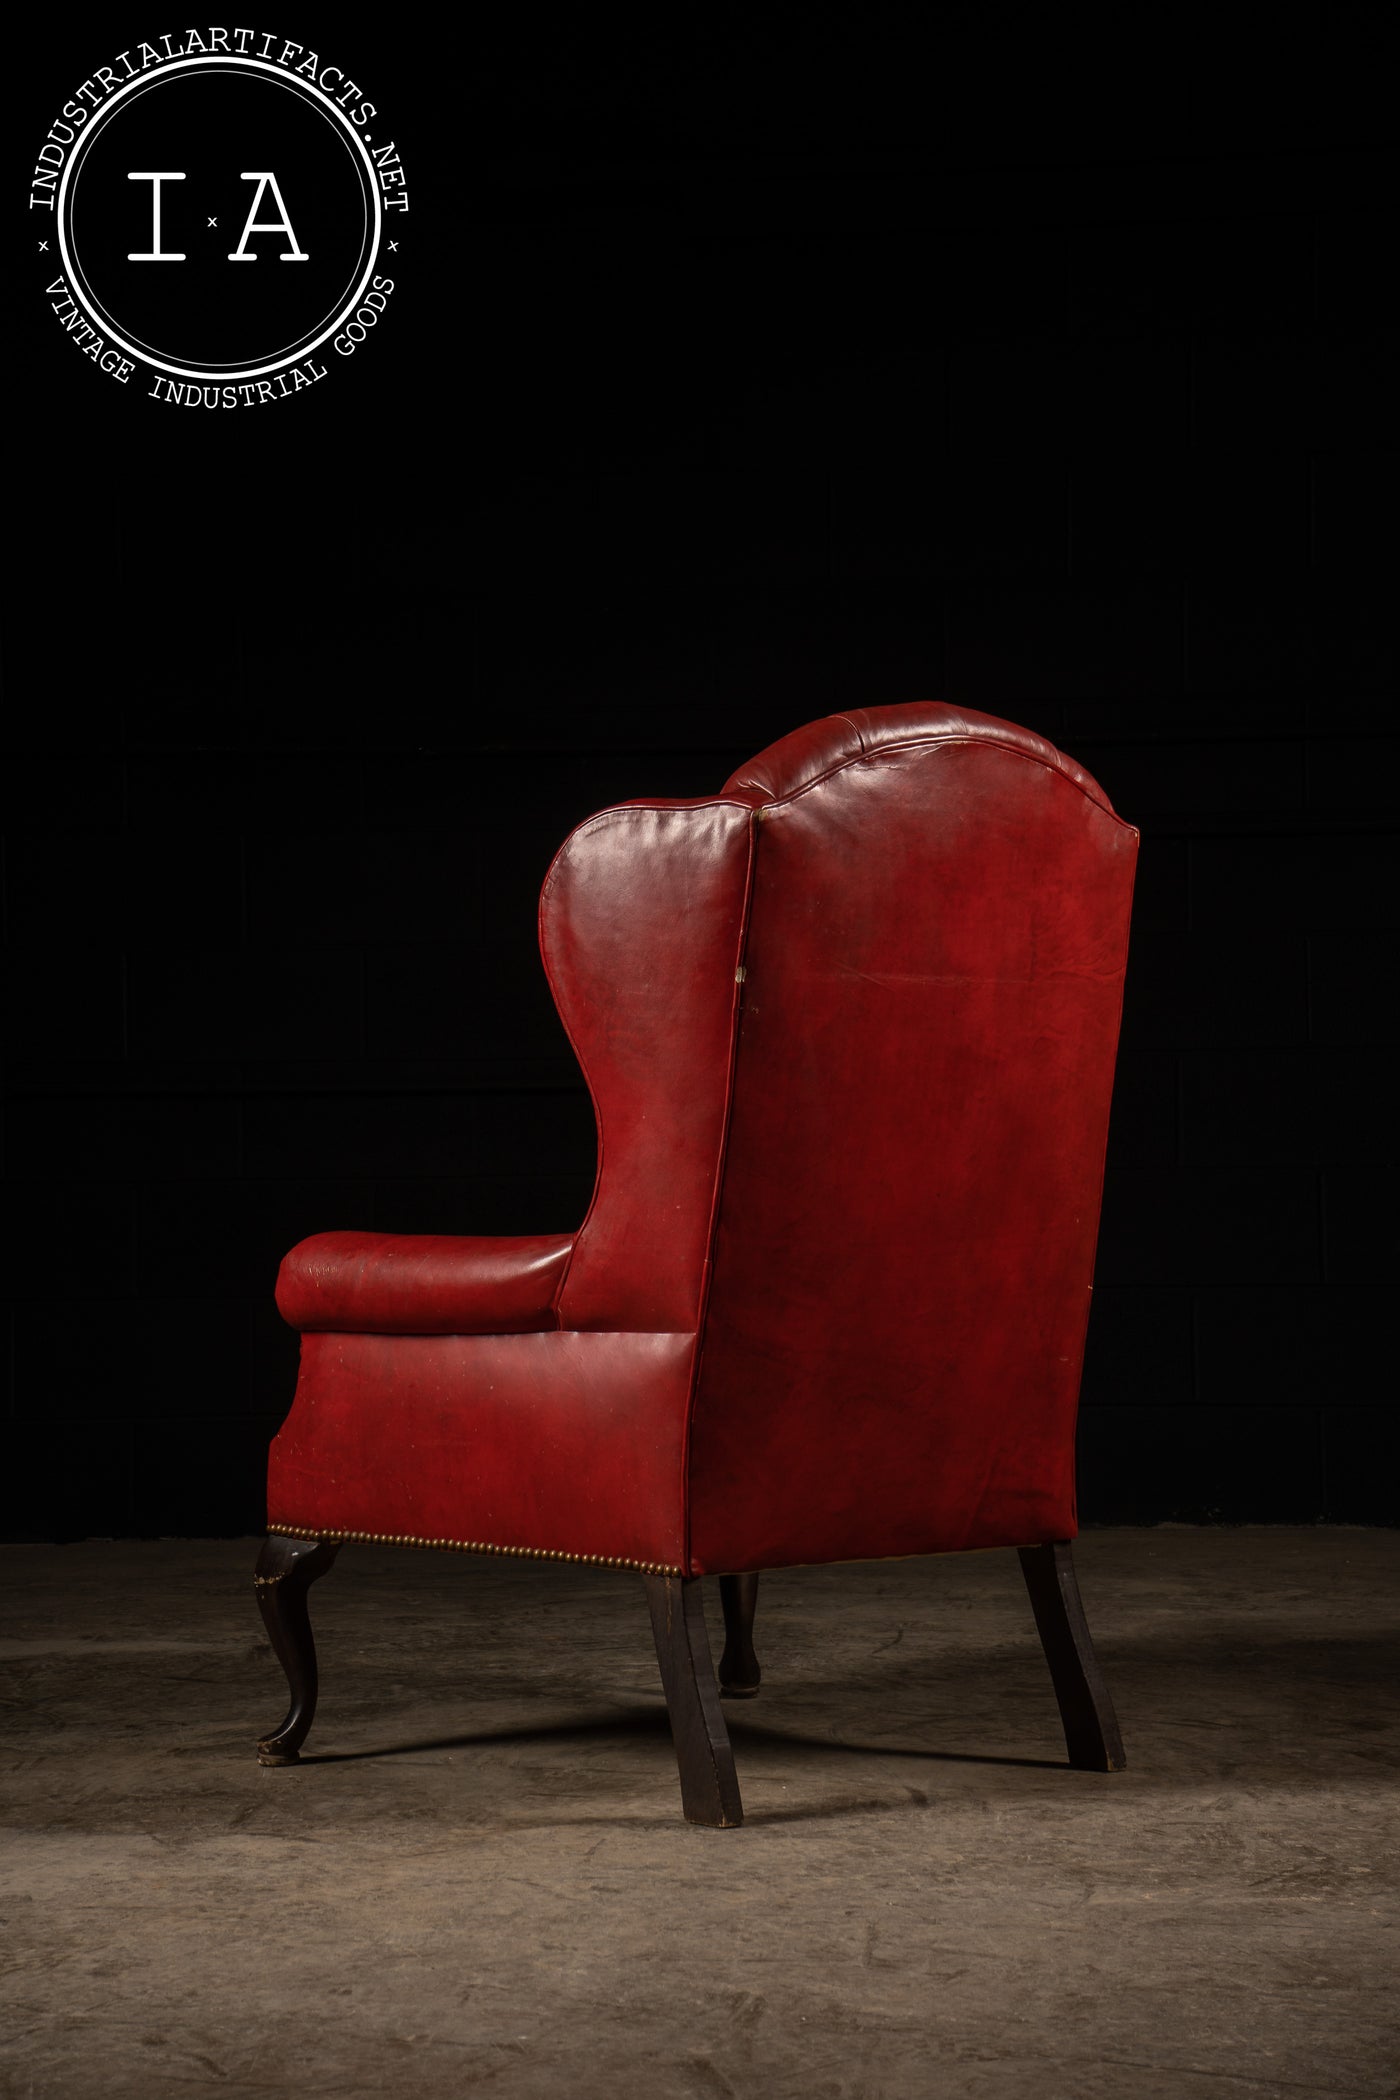 Antique Tufted Leather Armchair in Red with Ottoman